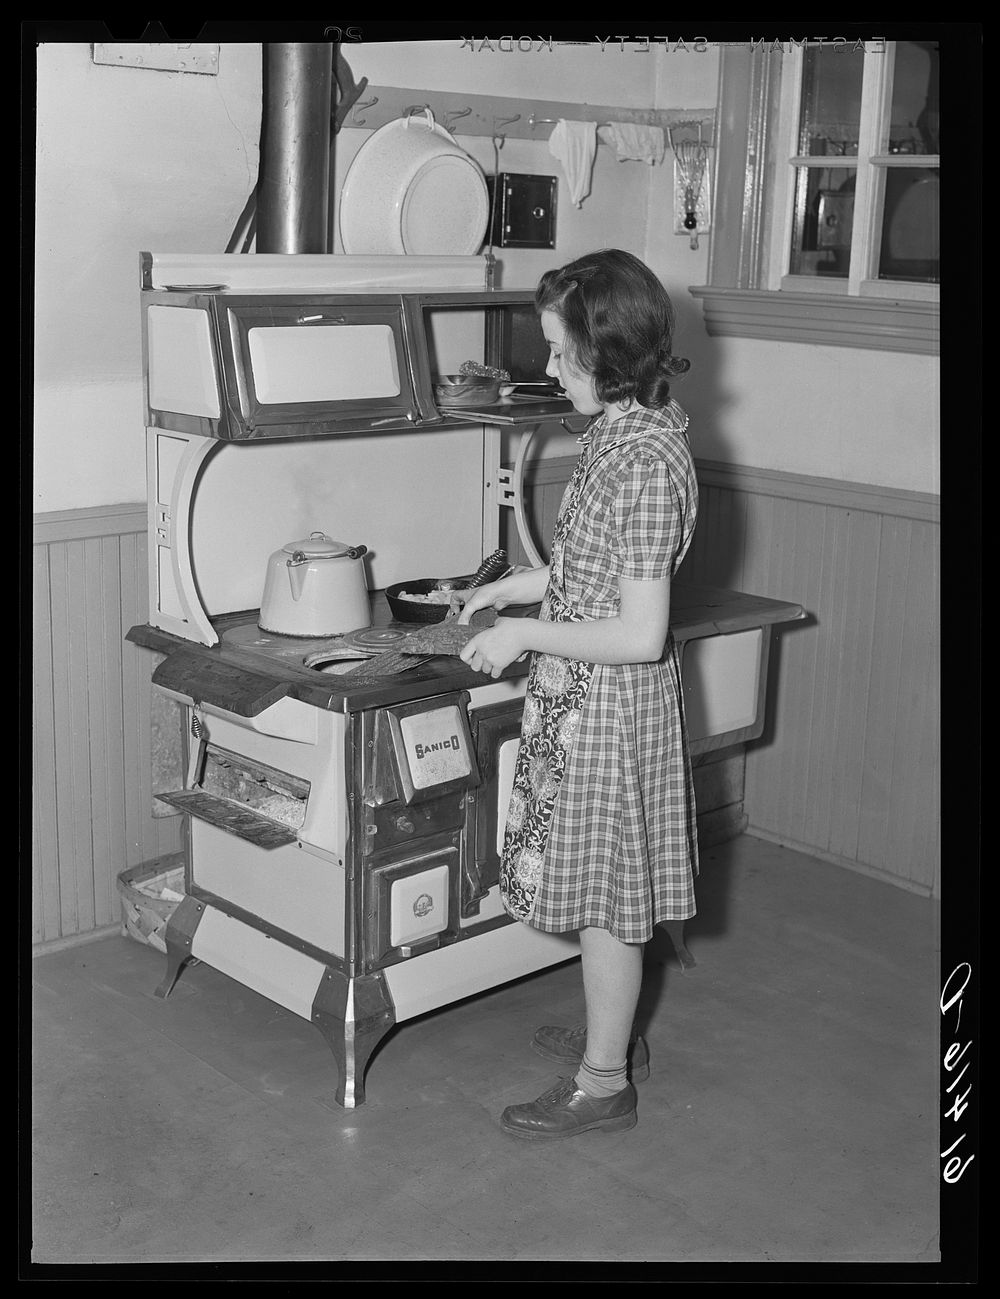 Farm girl putting wood in kitchen stove. Meeker County, Minnesota. Sourced from the Library of Congress.